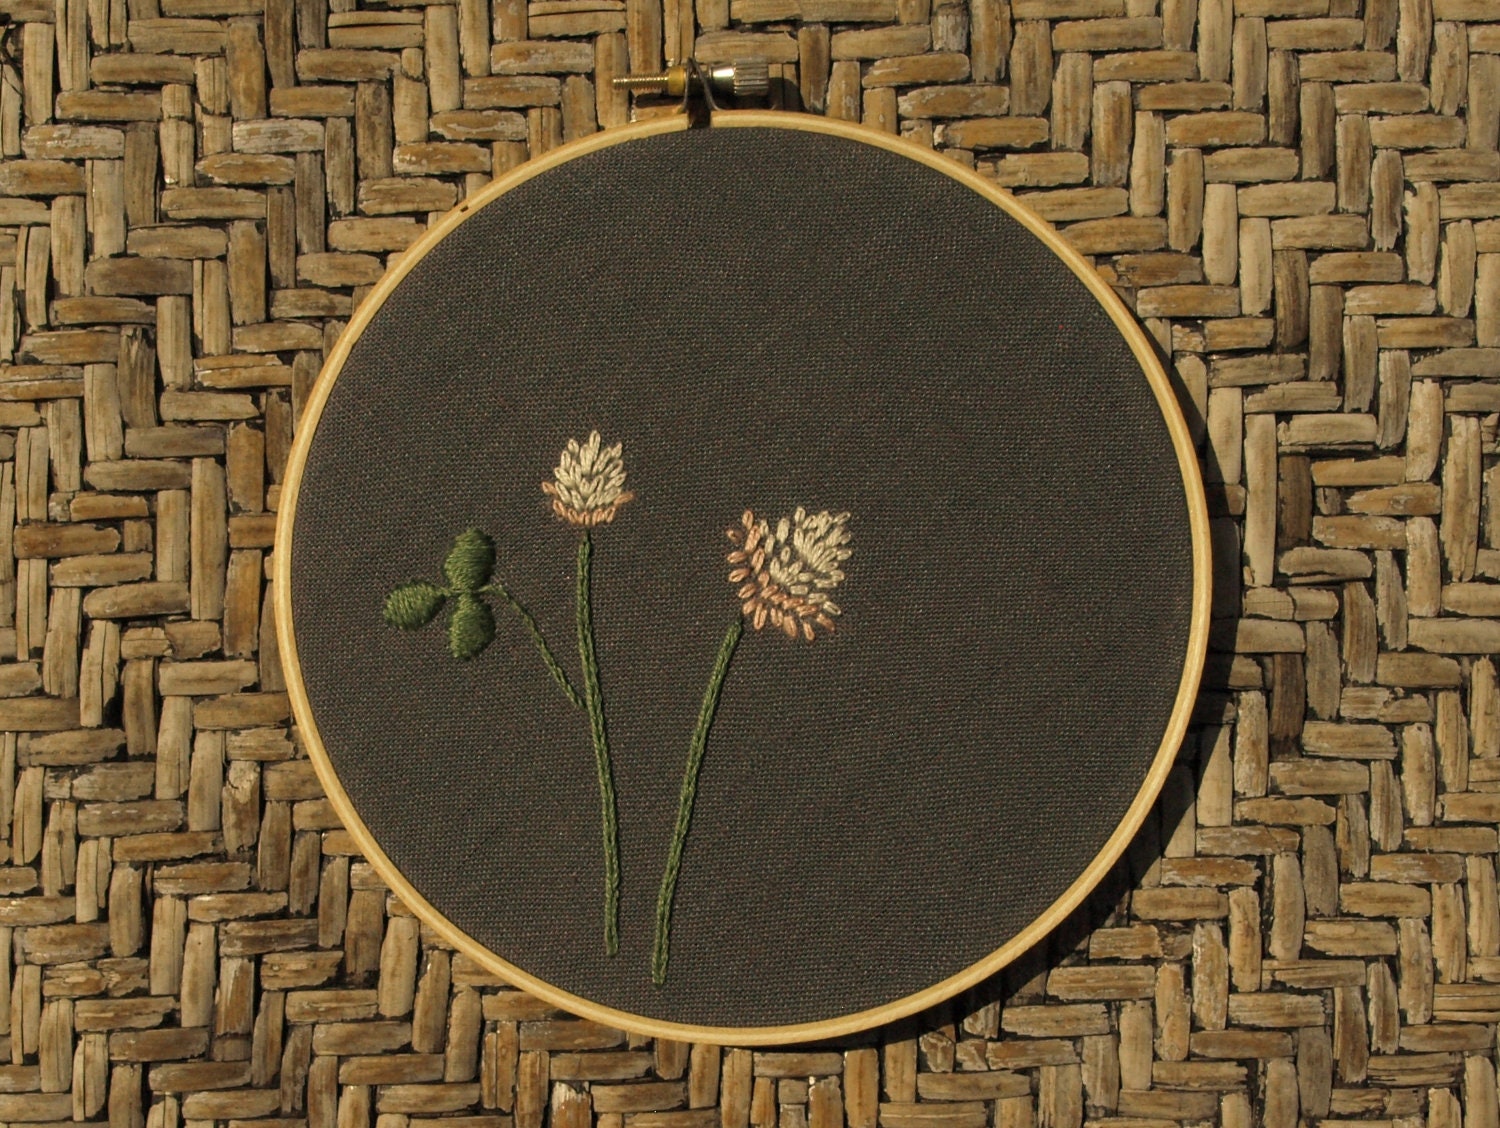 Hand embroidered clover wall art ready to hang in 5" wooden embroidery hoop